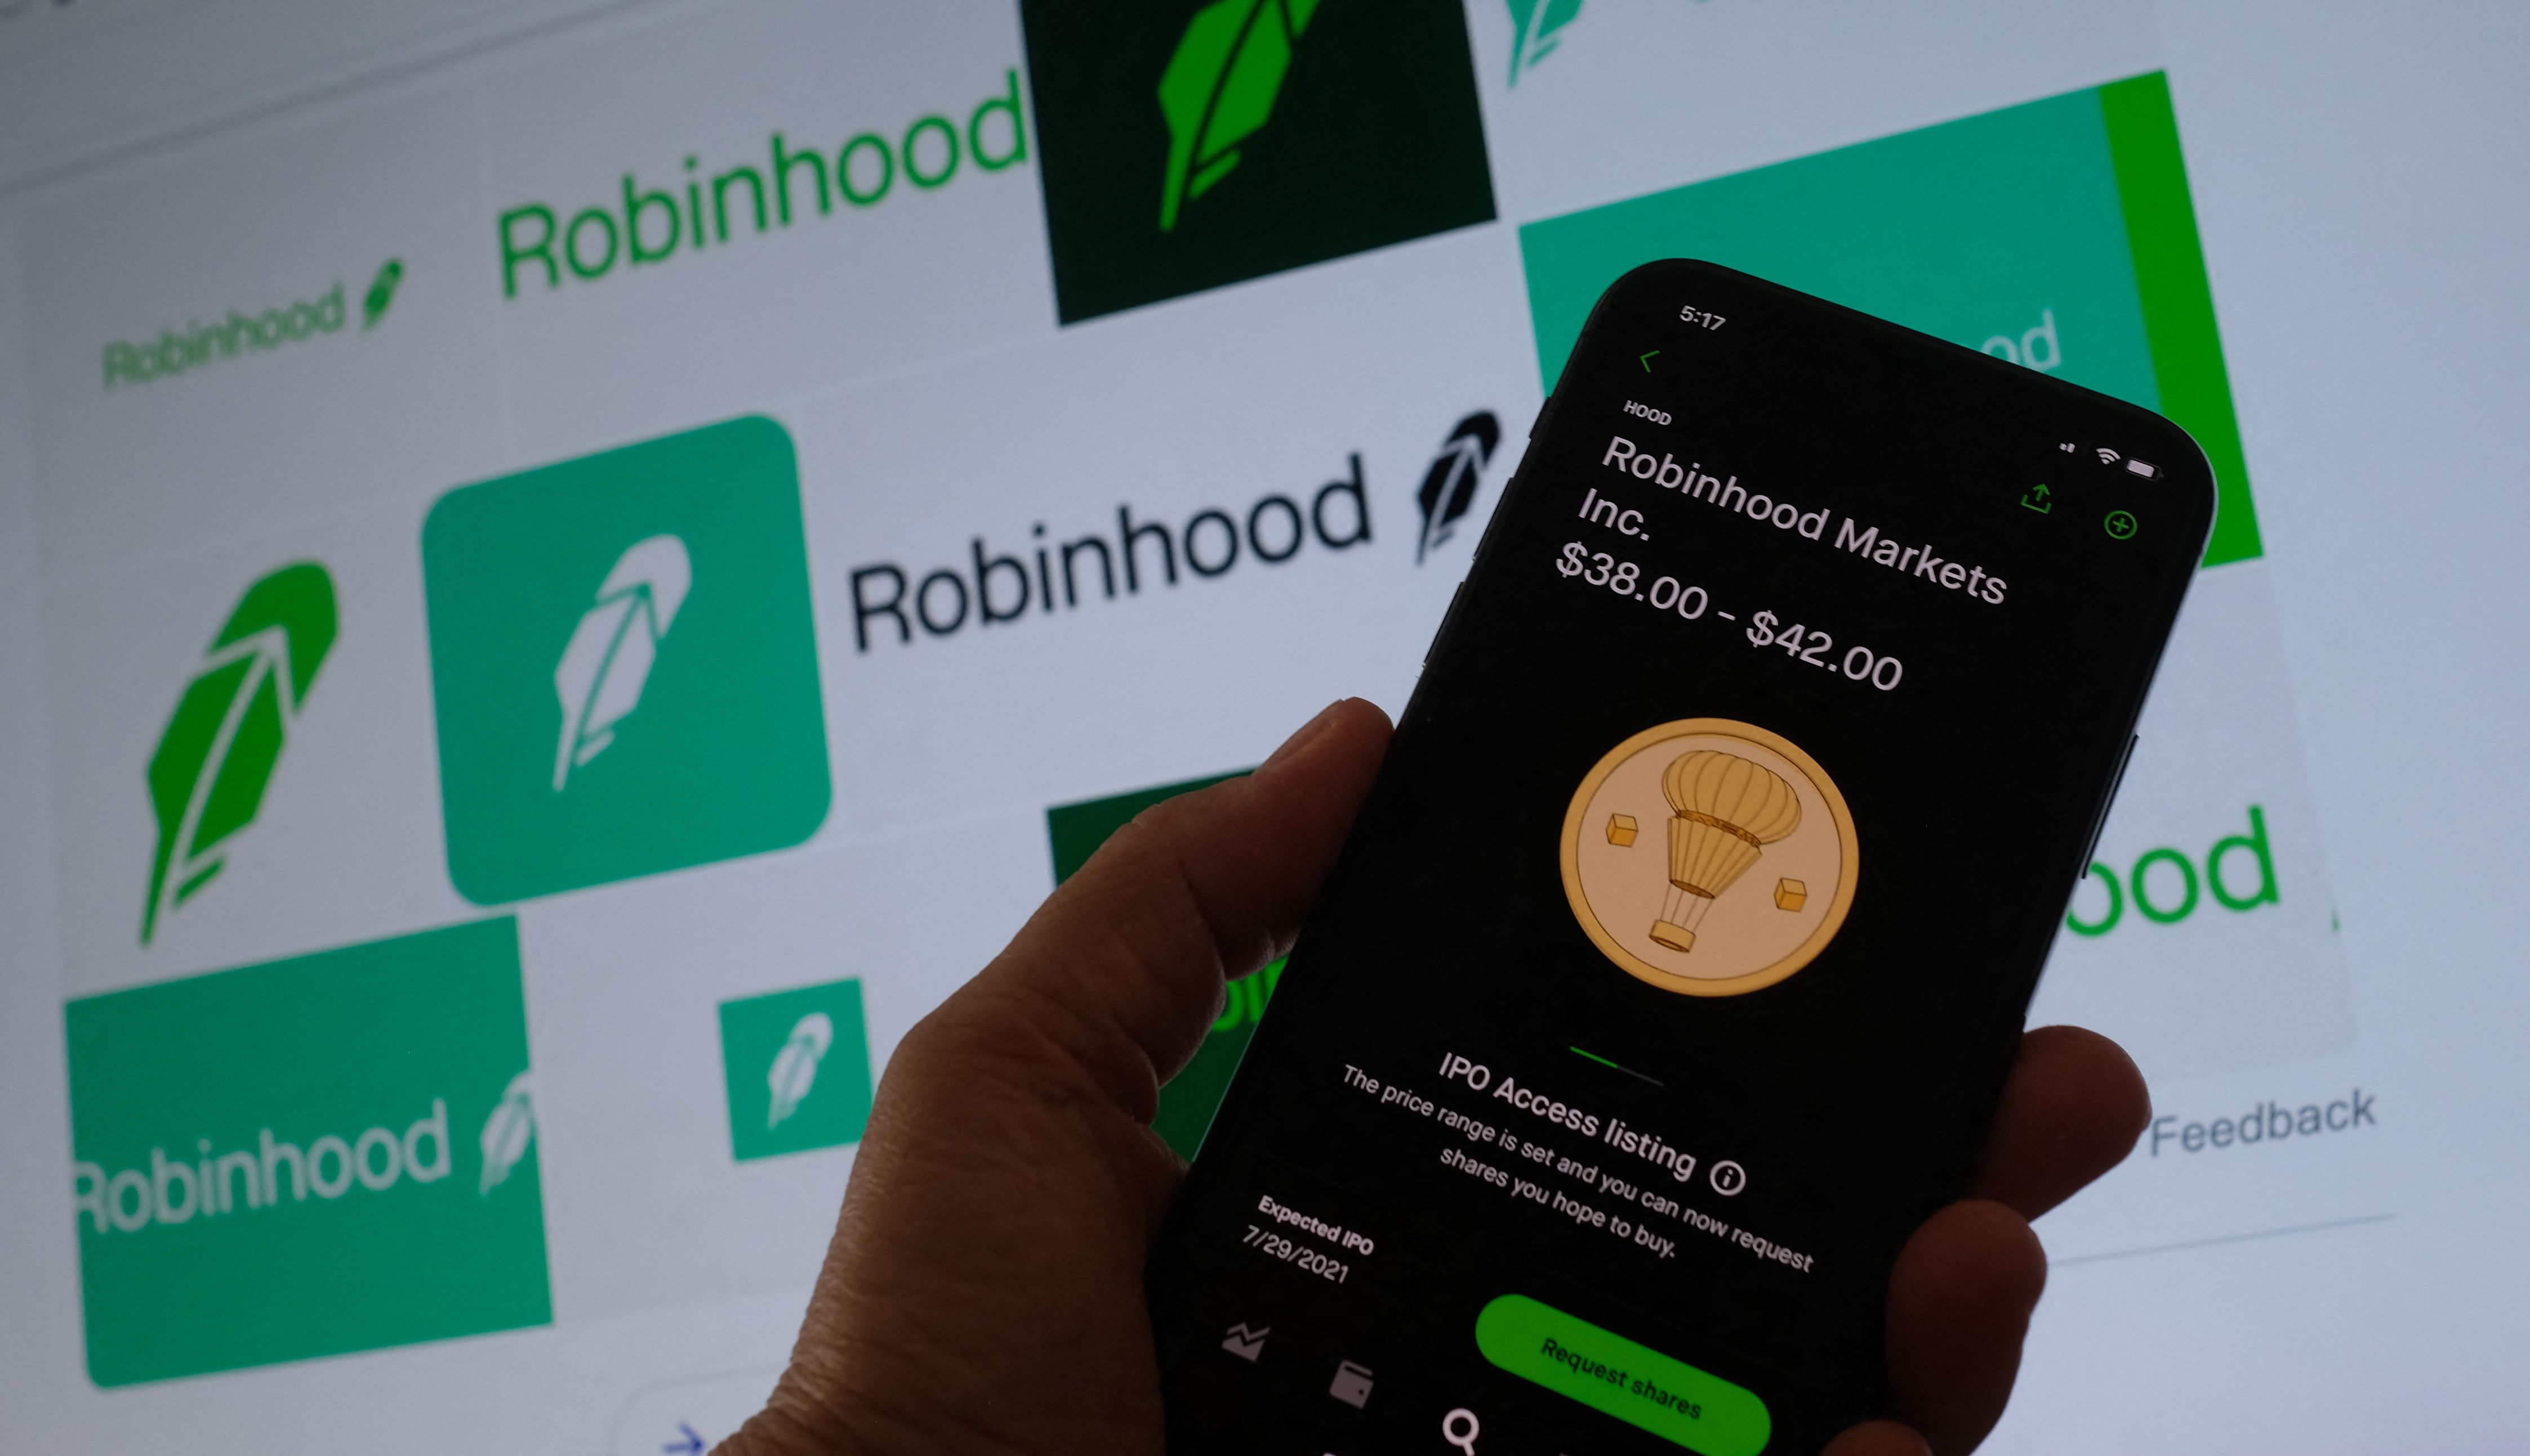 Robinhood's Era of Fun and Meme Stock Games Comes to an End